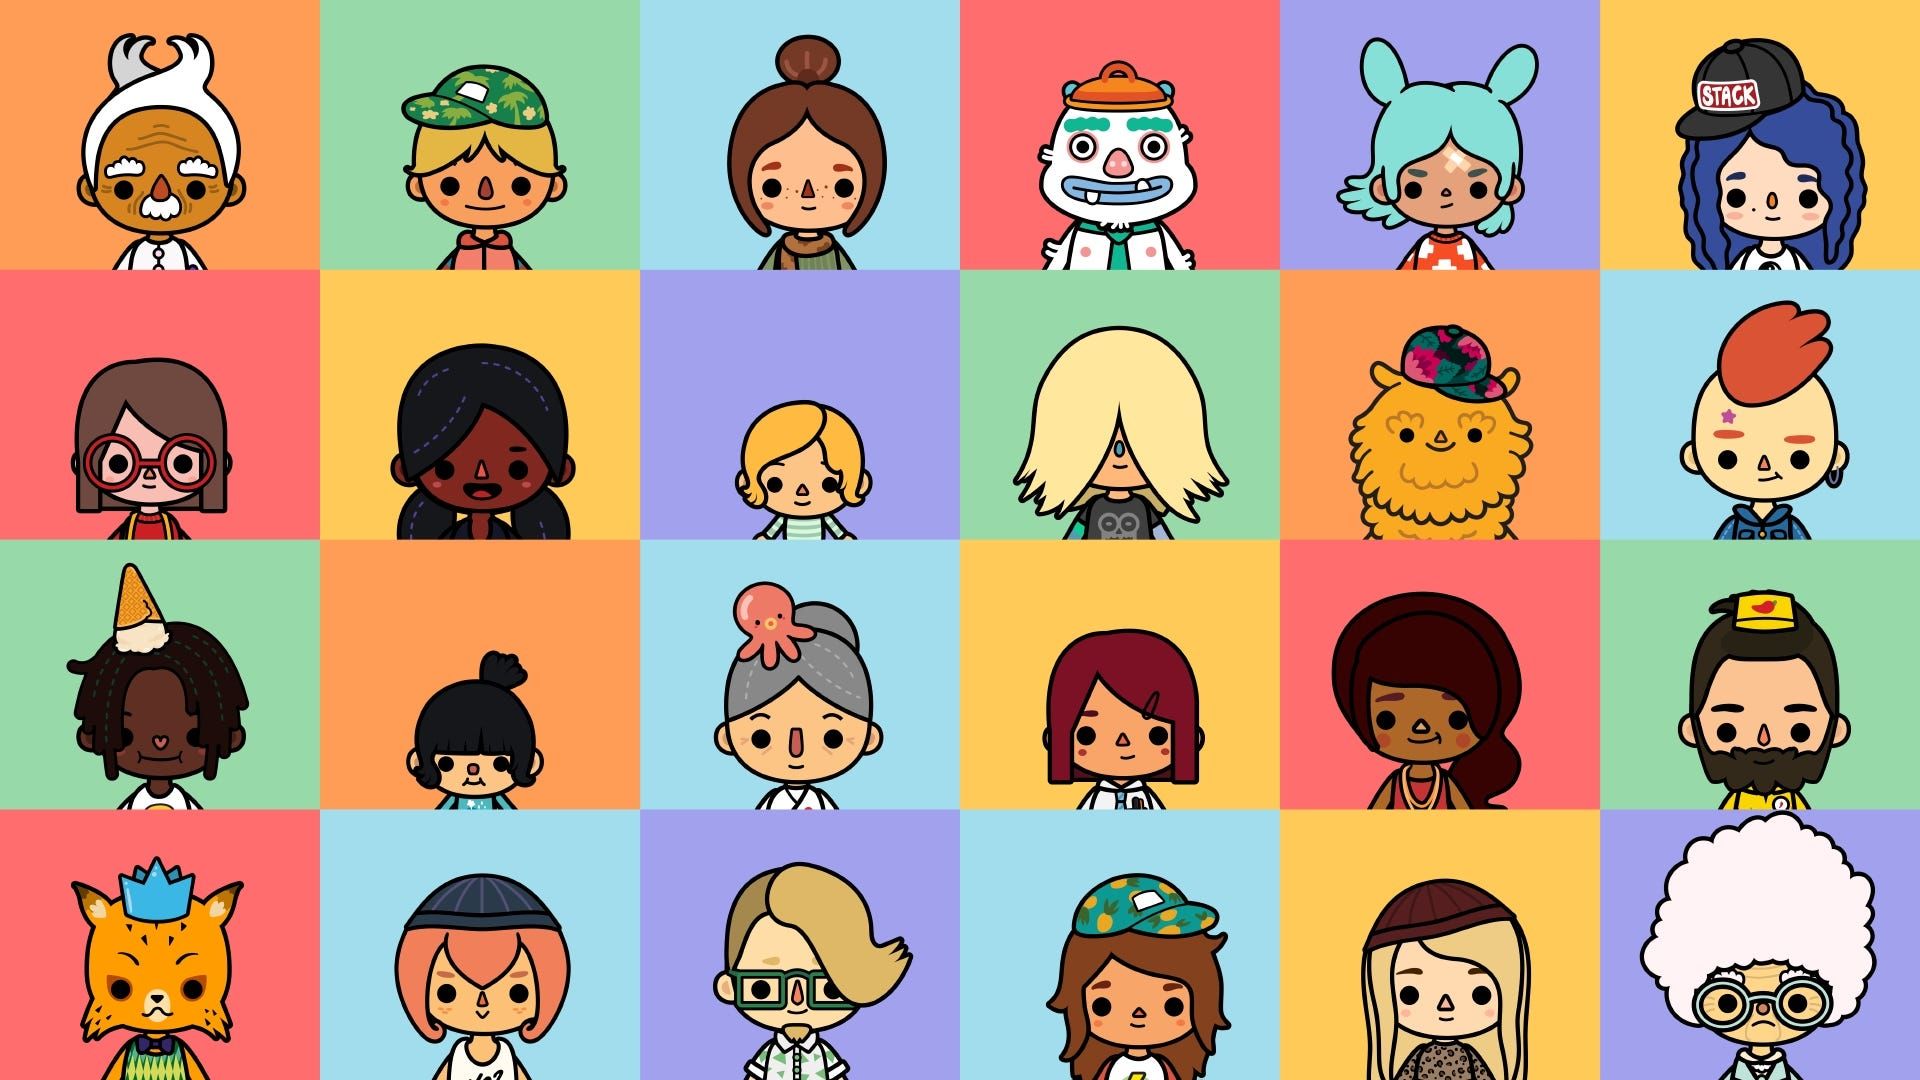 These kids apps highlight diversity